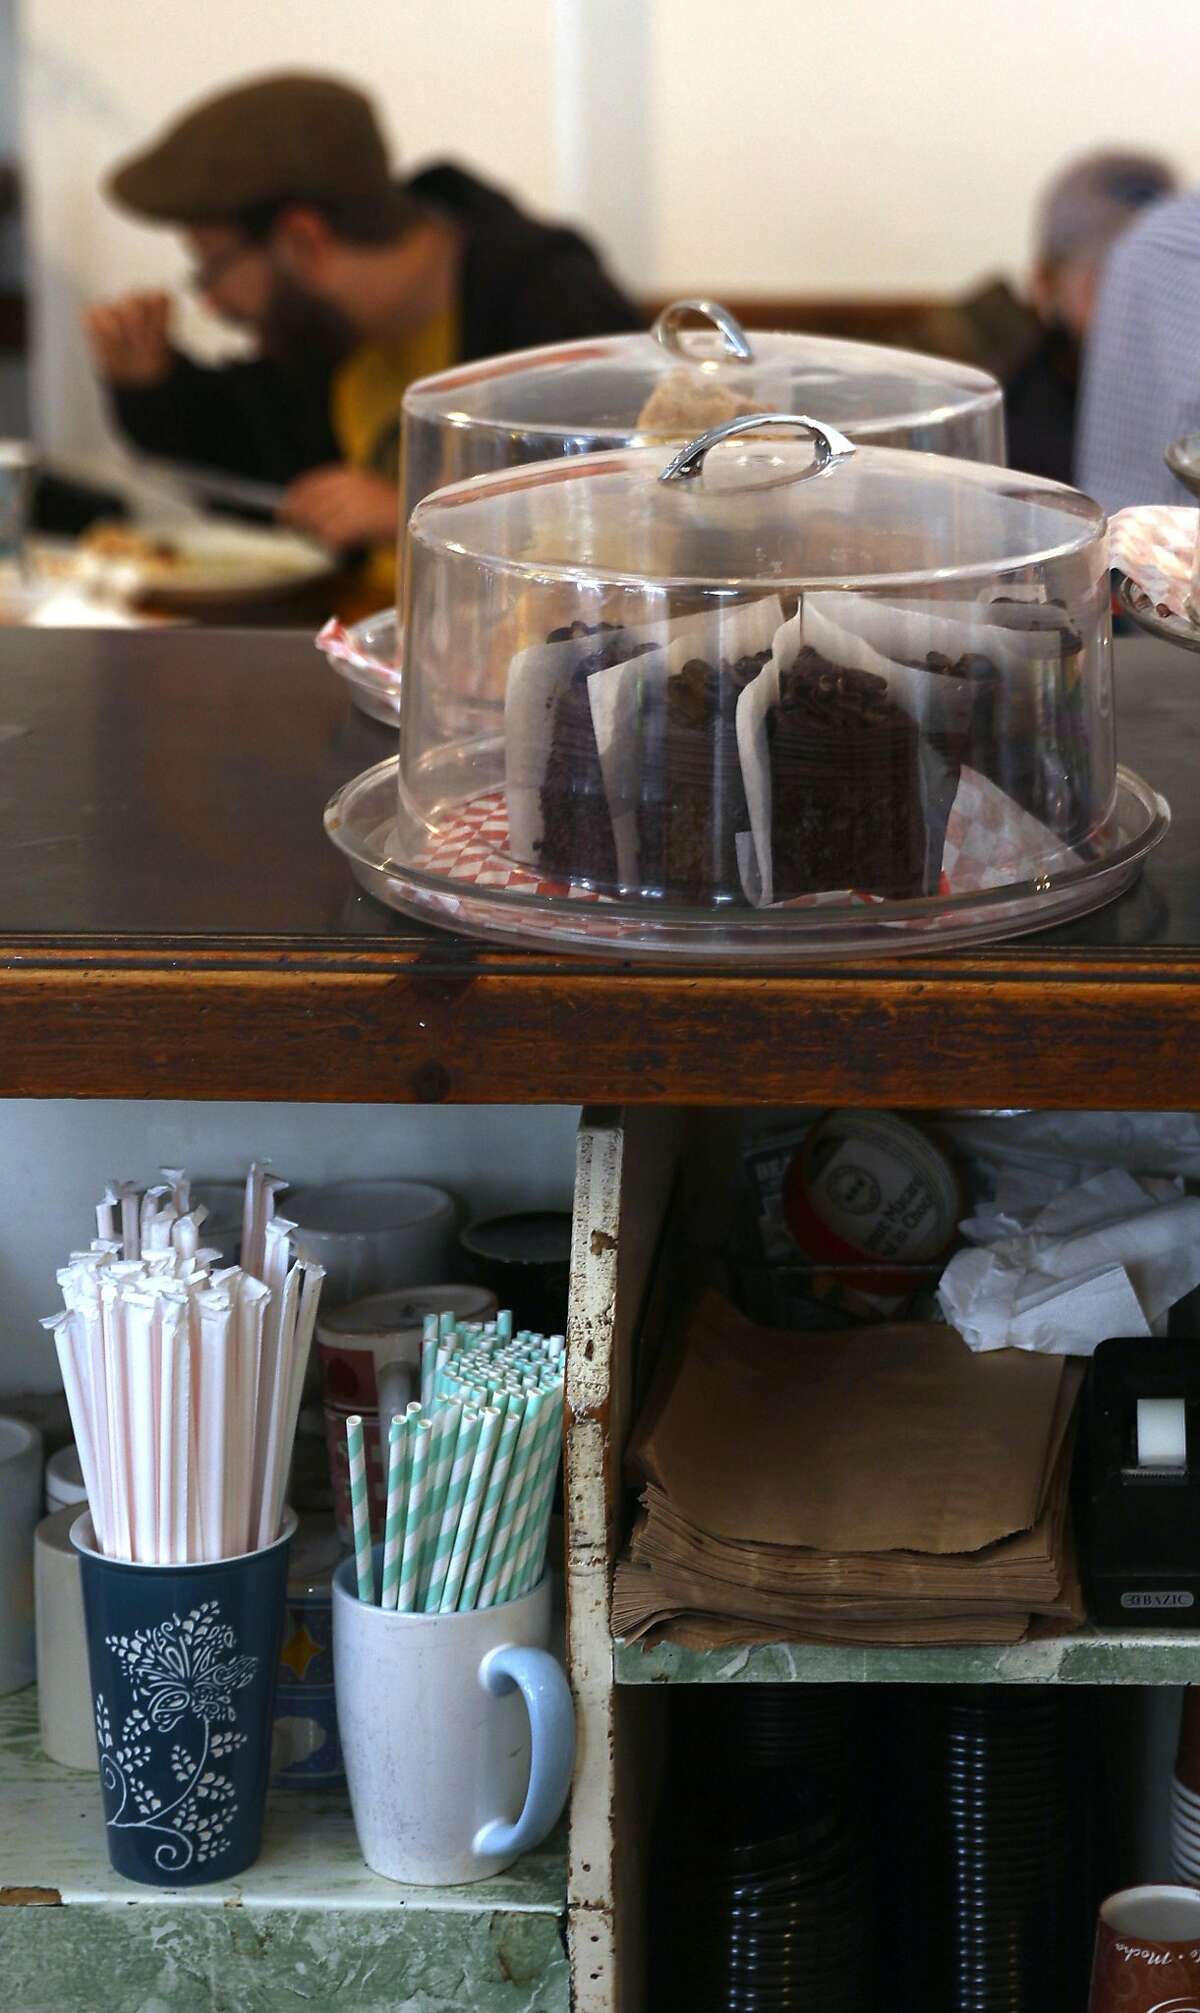 Cafe International has their paper and plastic straws seen stored behind the counter long on Tuesday, July 9, 2019, in San Francisco, Calif. The team from the San Francisco Dept. of the Environment go door to door to let restaurants know about the new law that started July 1, under which restaurants cannot automatically give out plastic utensils, napkins, condiment packages and other disposable items to diners, whether eat-in or take-in. They can give out the items upon request or can offer them in a self-serve area.